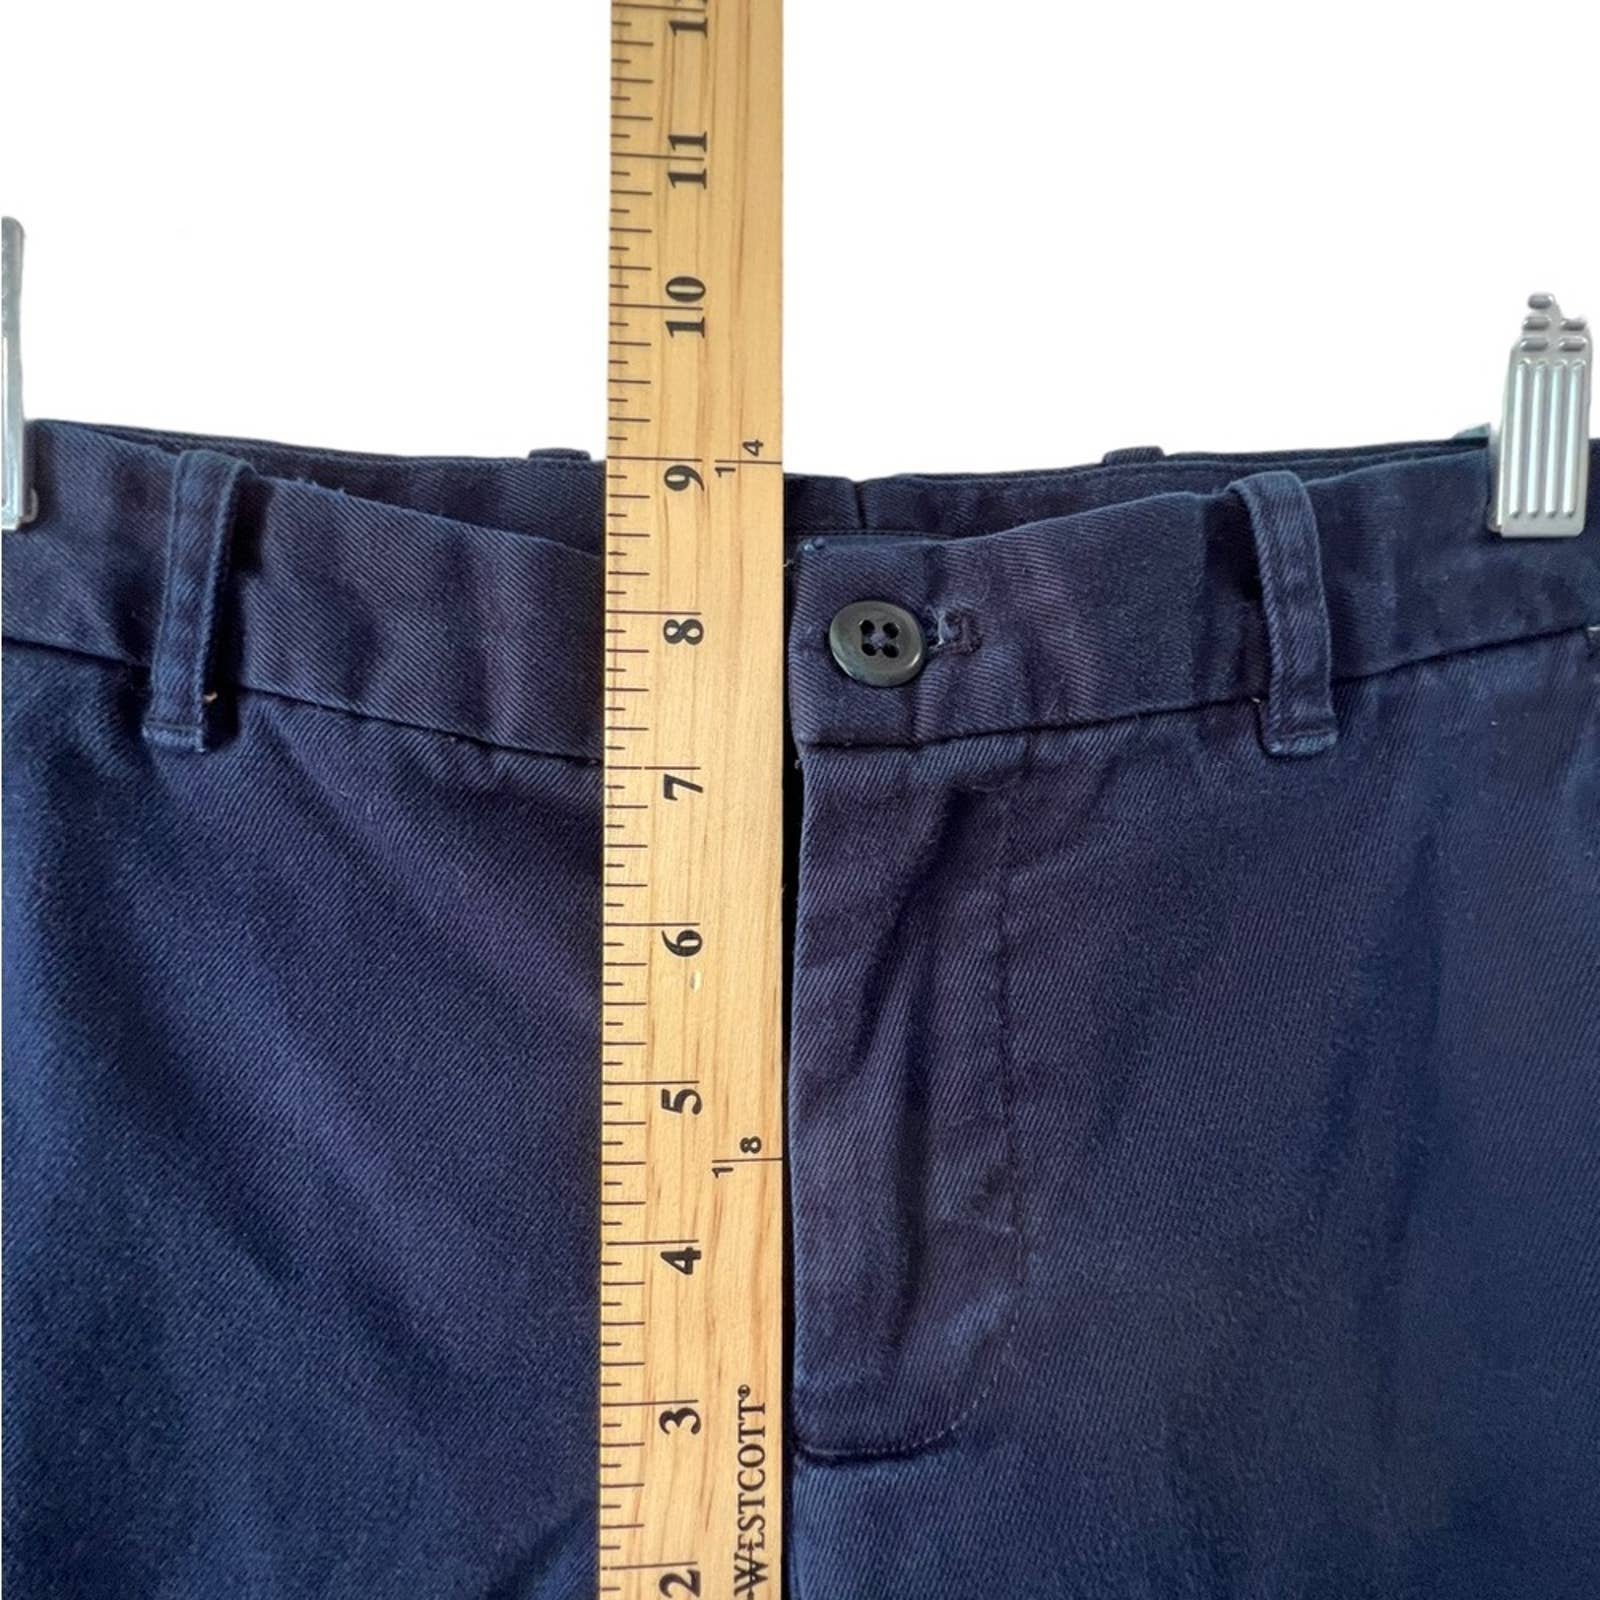 Wholesale price Ralph Lauren Sport Women´s Navy Flat Front Stretch Trousers Size 6 PpFdYUEpI Everyday Low Prices